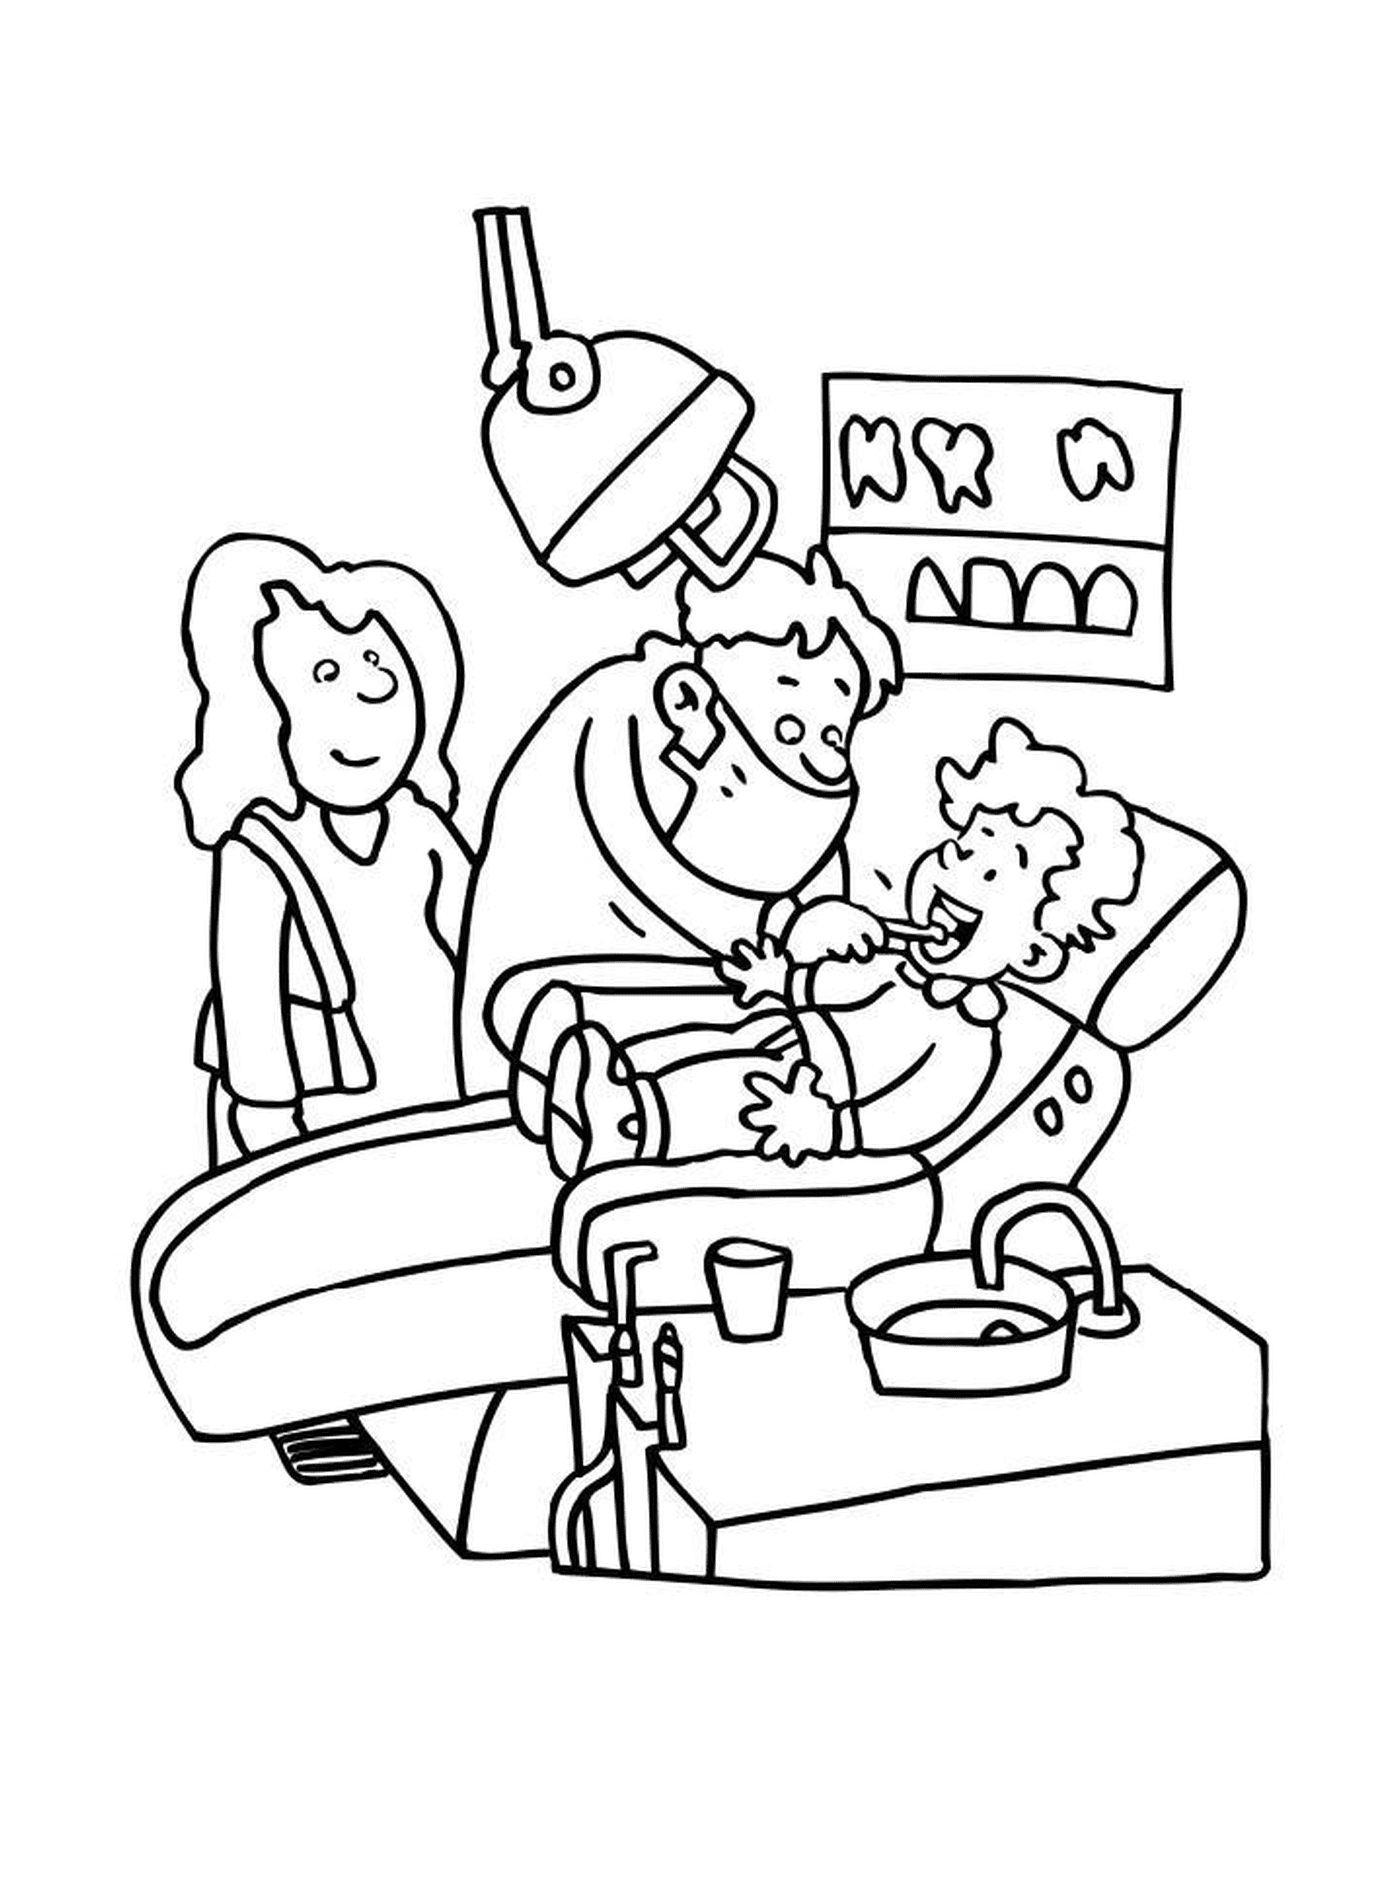  A child and his mother visit a dentist 